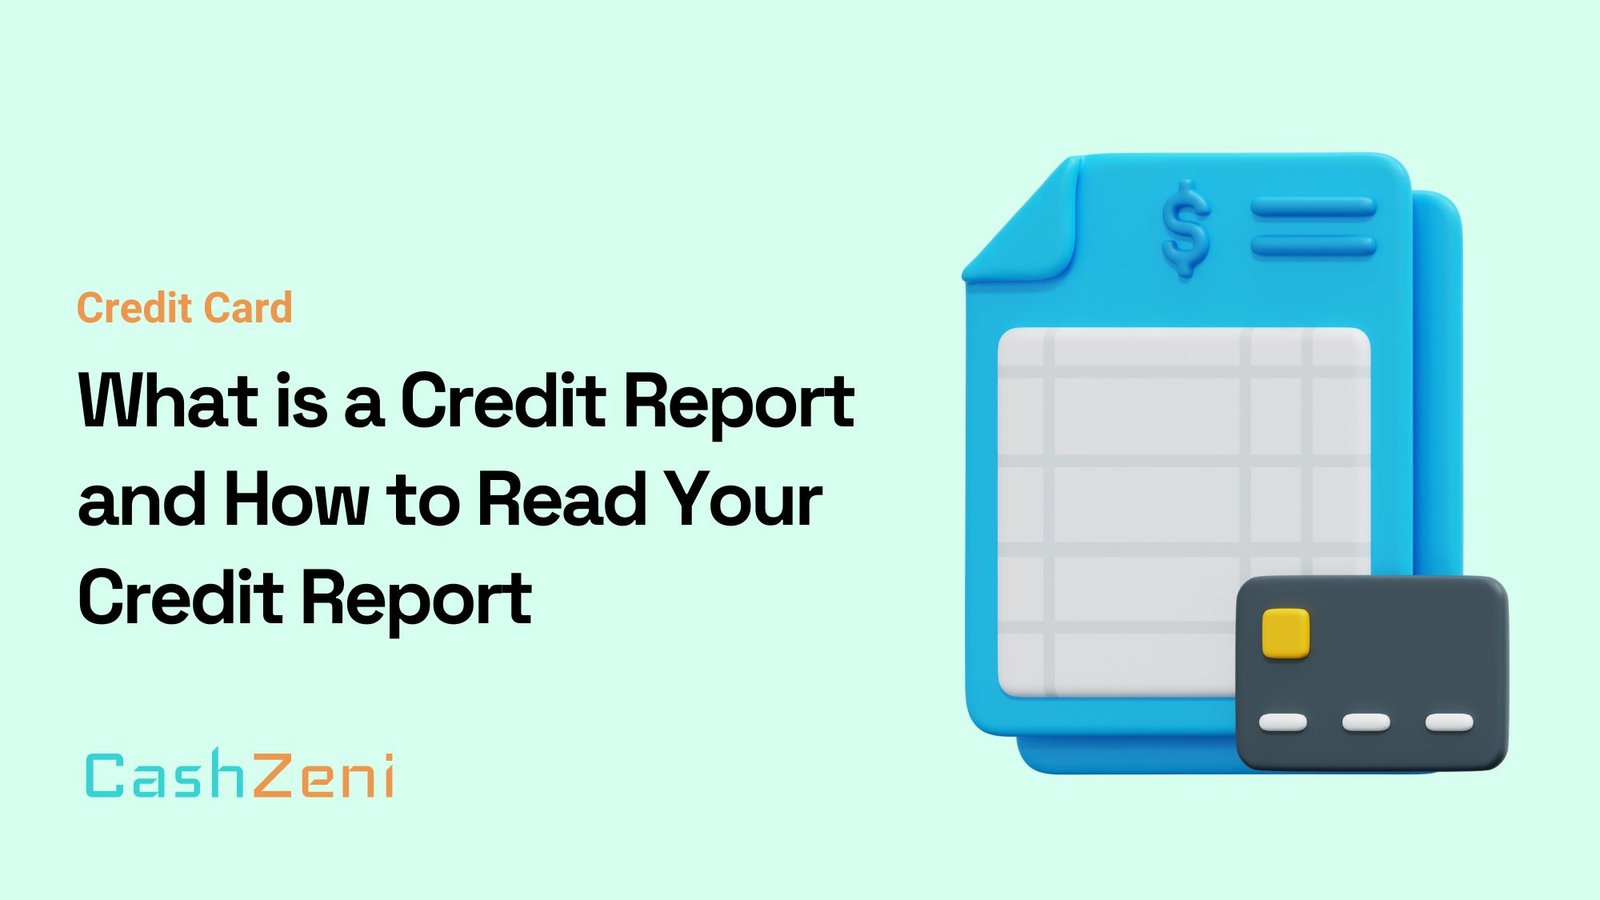 What is a Credit Report and How to Read Your Credit Report